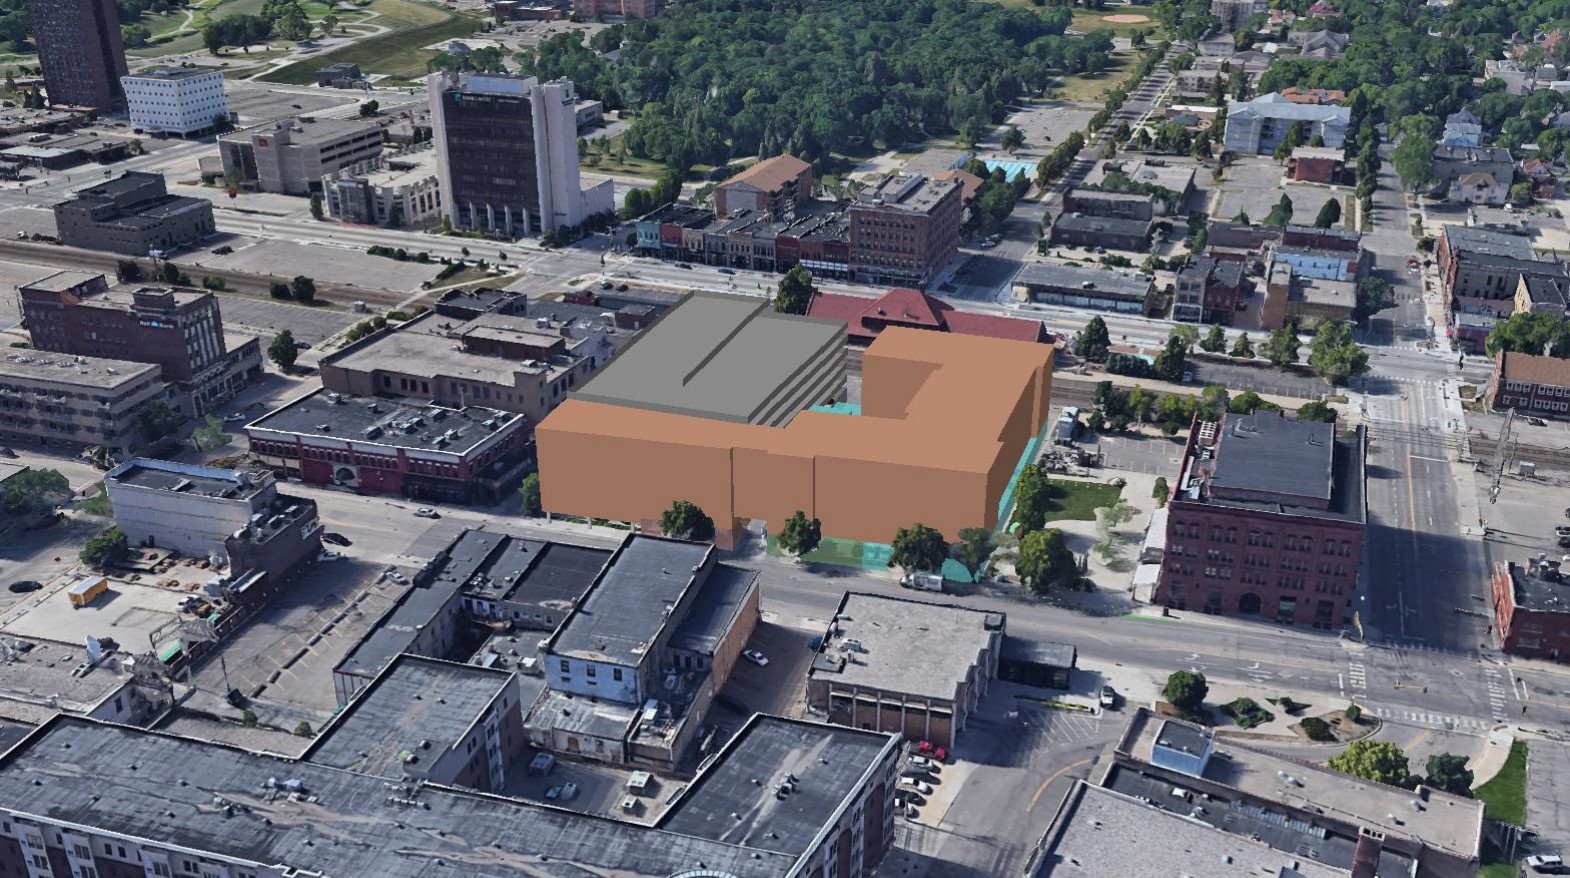 $20 Million Parking Ramp Plan for Theater, Apartment Complex in Downtown Fargo Gets Warm Reception